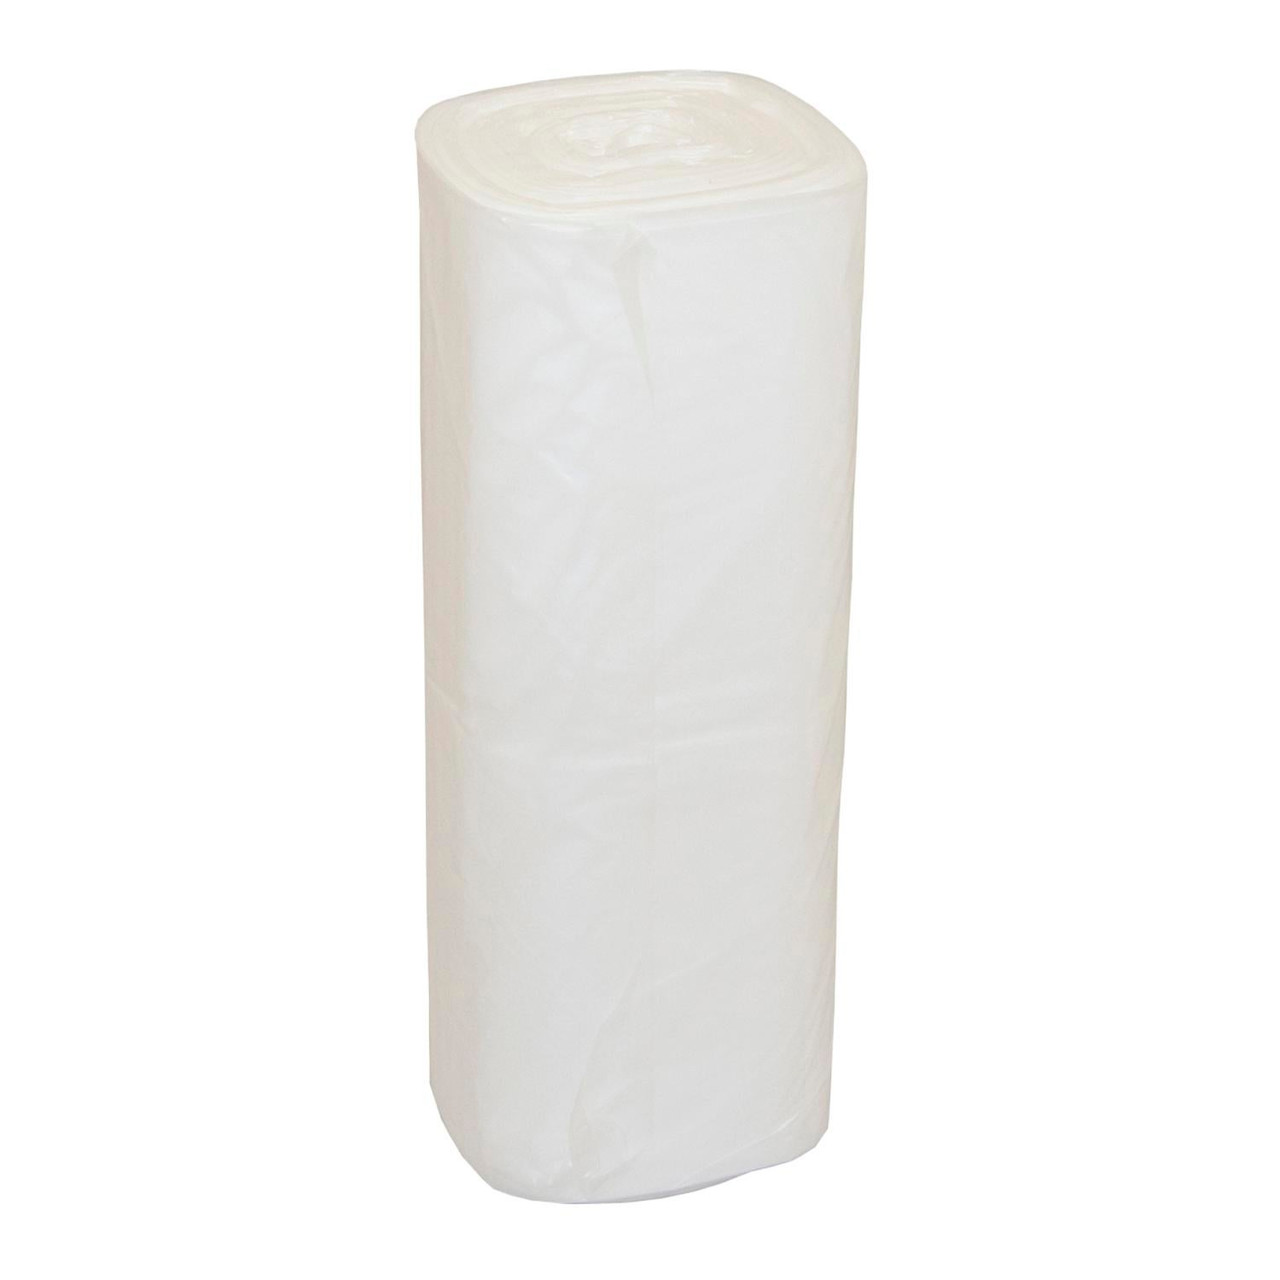 Hy Pax Clear Strong Garbage Bags, 35Inx50In Fcs | 25UN/Unit, 4 Units/Case